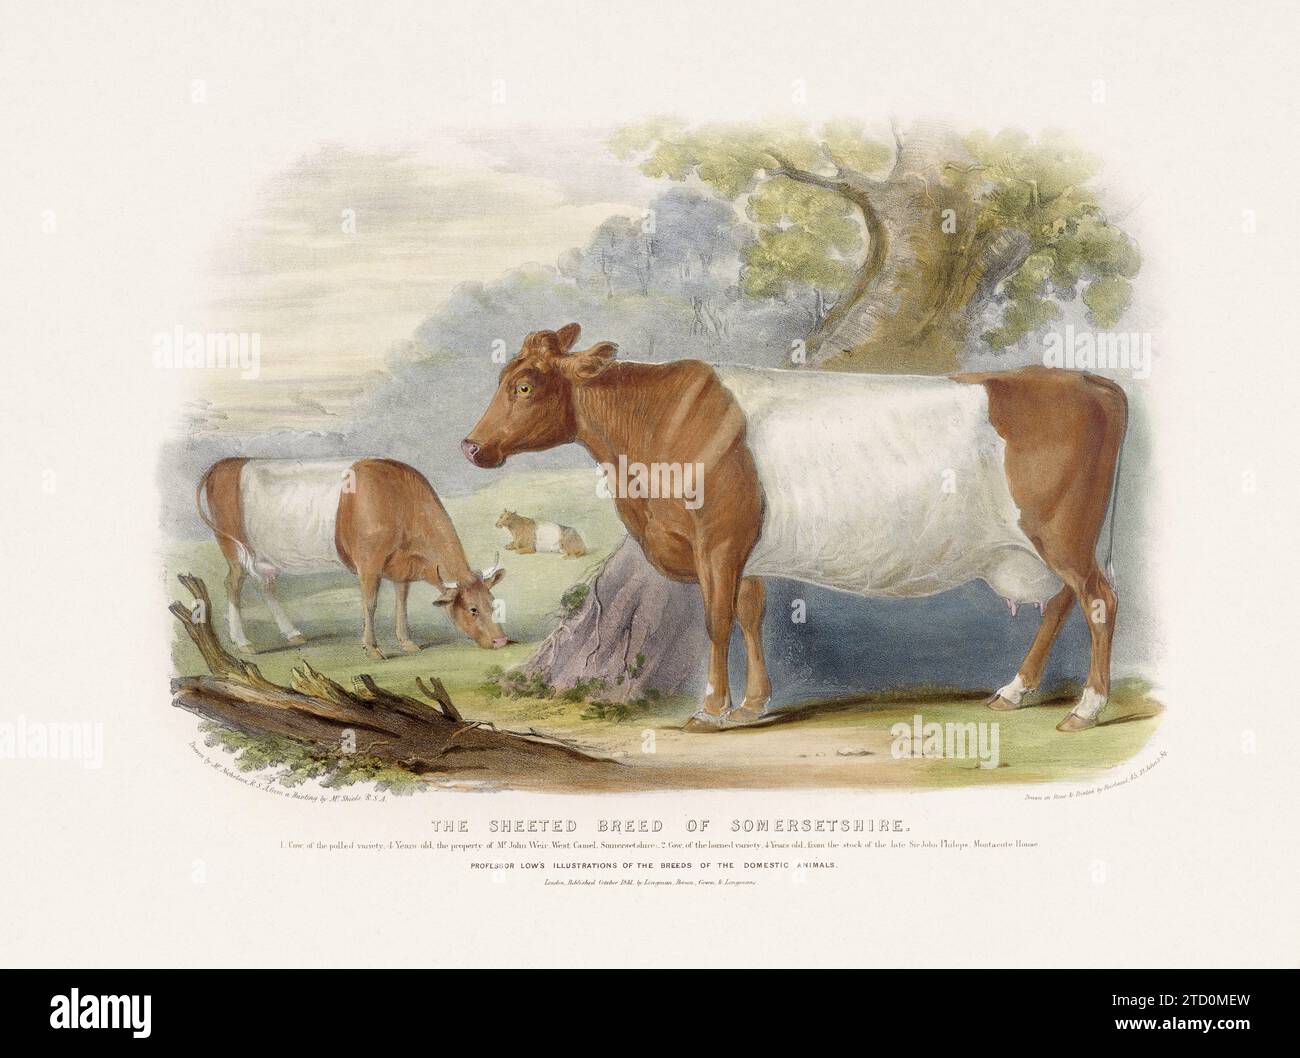 Vintage Cow illustration from a mid-19th-century book on domestic animal breeds. Stock Photo